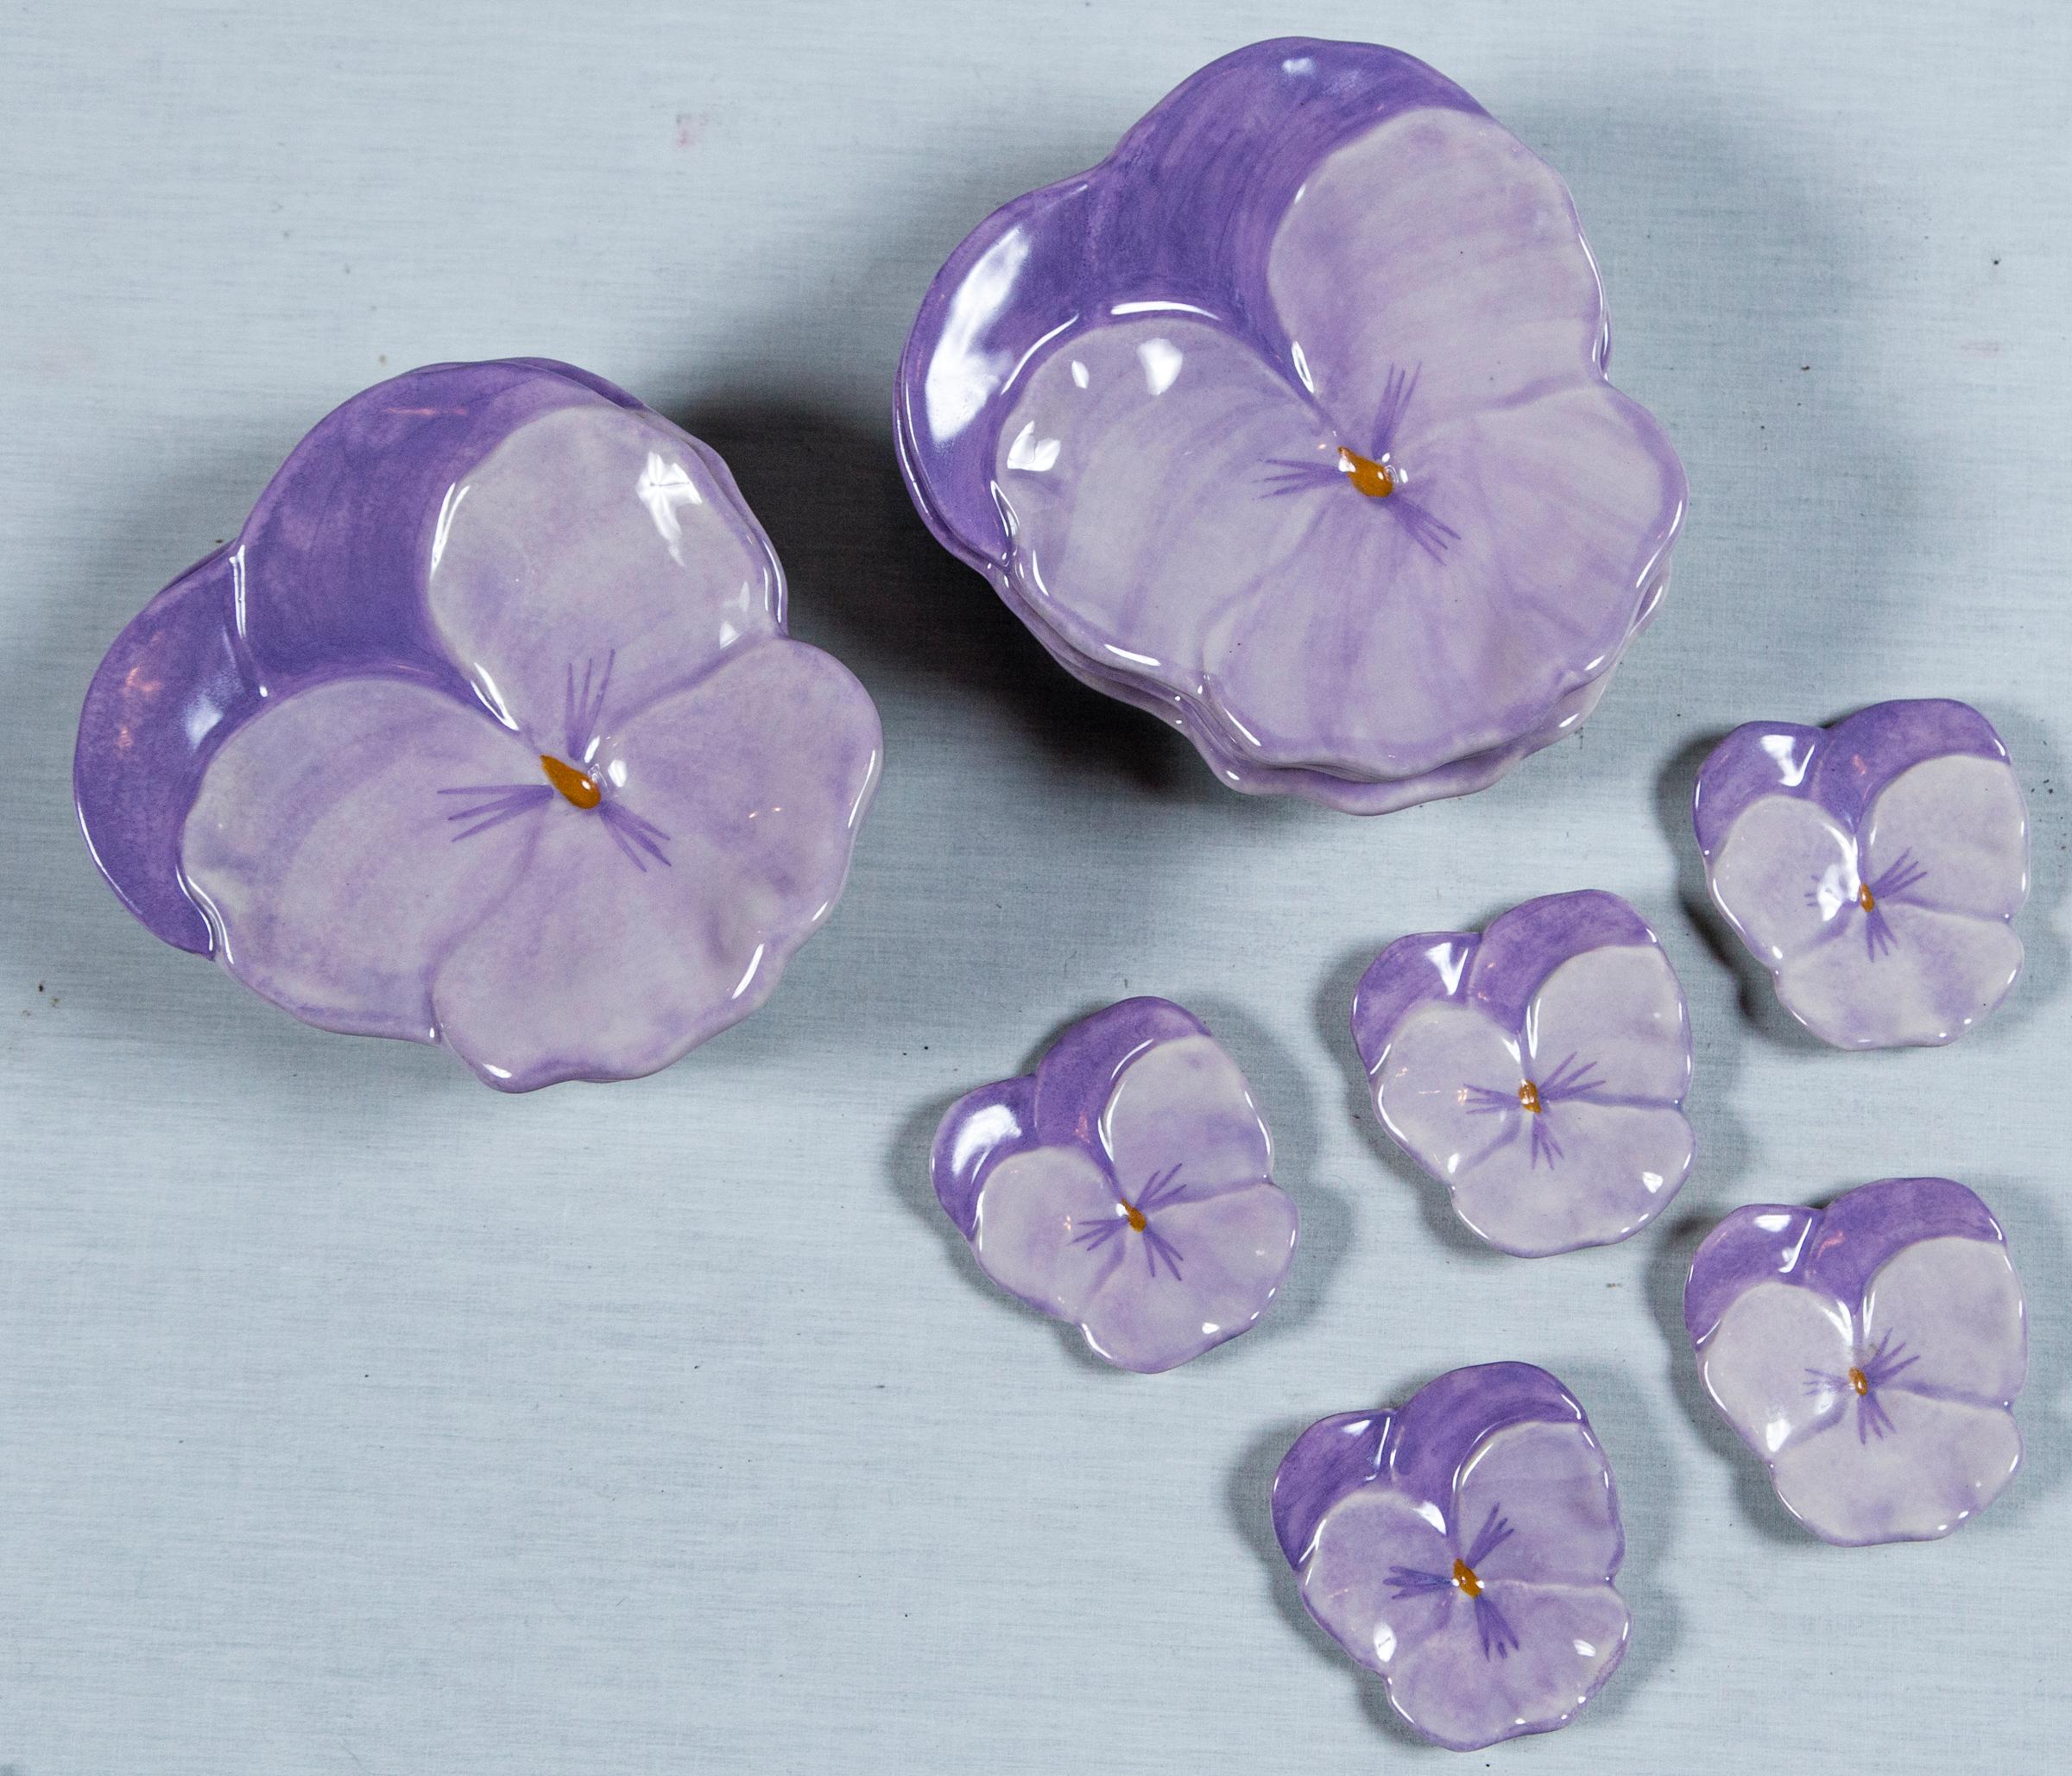 Midcentury highly collectible ceramics. Eight medium size purple pansy plates by Ernestine Salerno Italian ceramic dishes. Five small size purple pansy by same. Small plates are 3.25 by 3.5 inches.